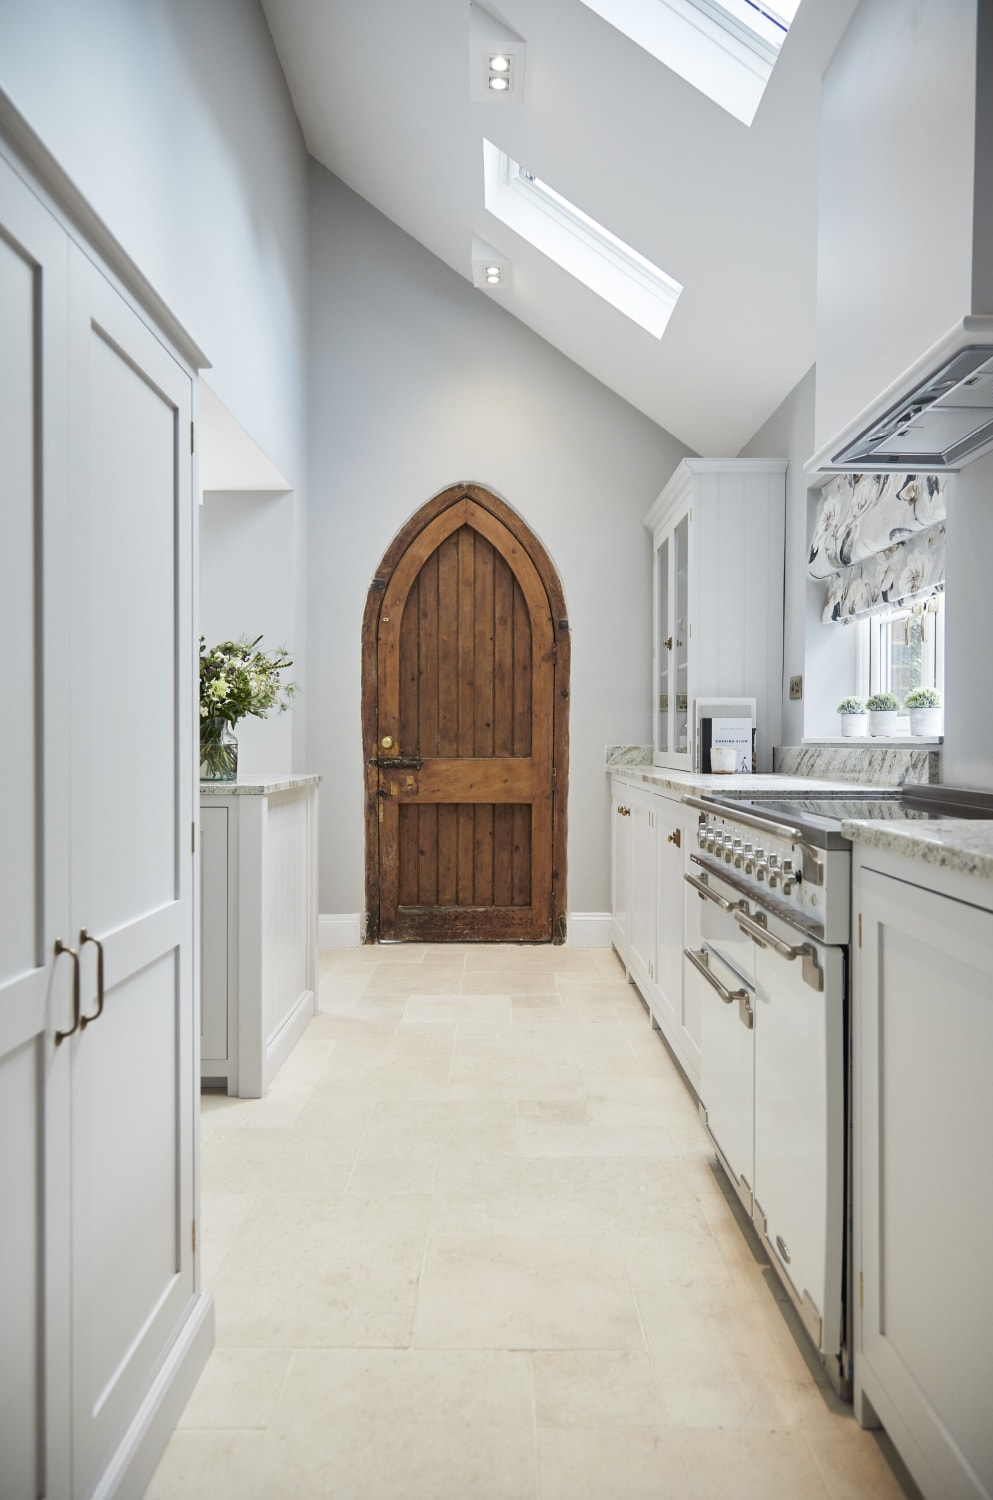 Does the door go with the rest of the interior? (kitchen in a Victorian home originally a School House)